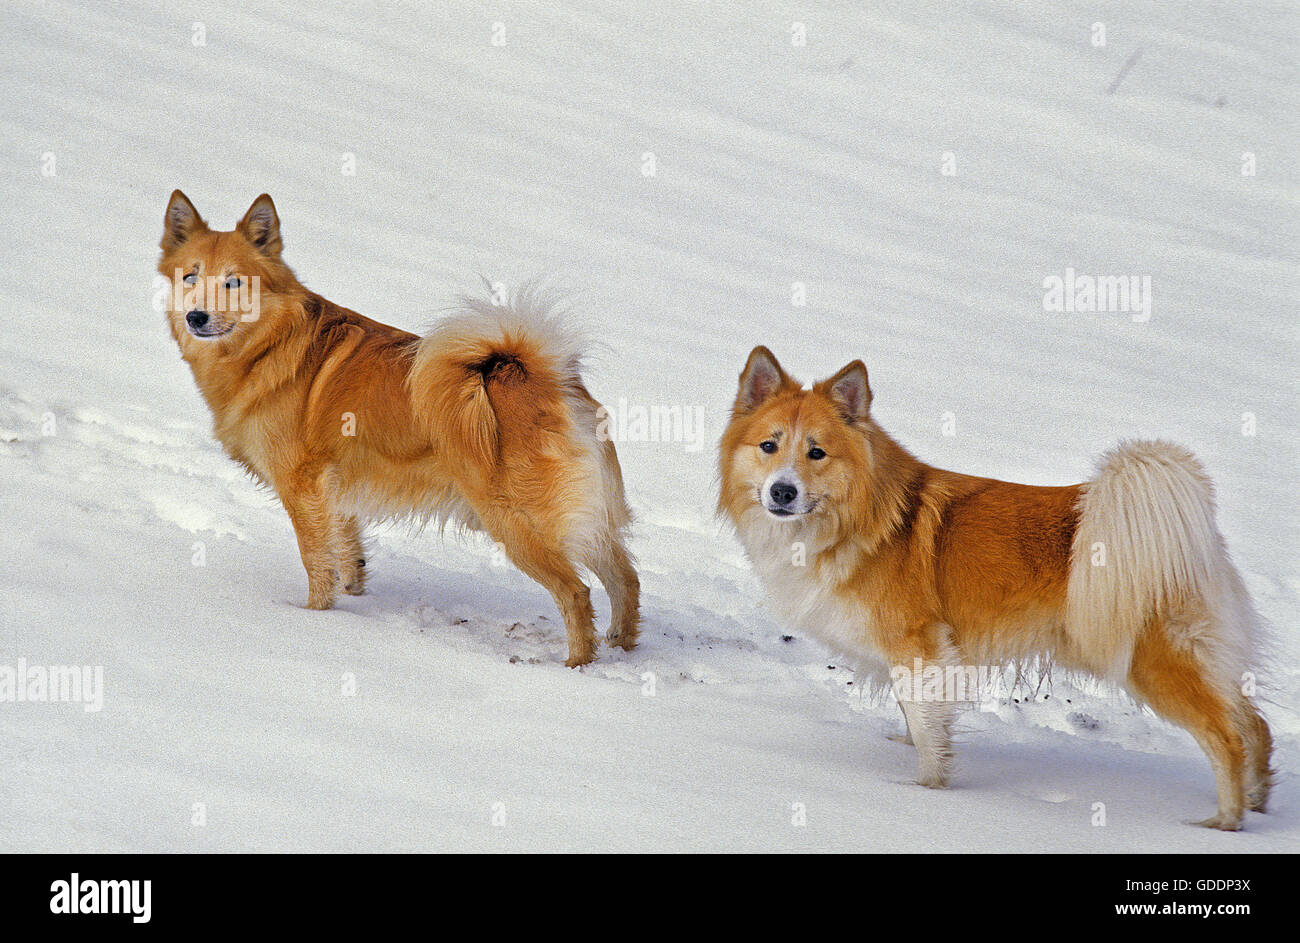 Iceland Dog or Icelandic Sheepdog, Adults standing on Snow Stock Photo